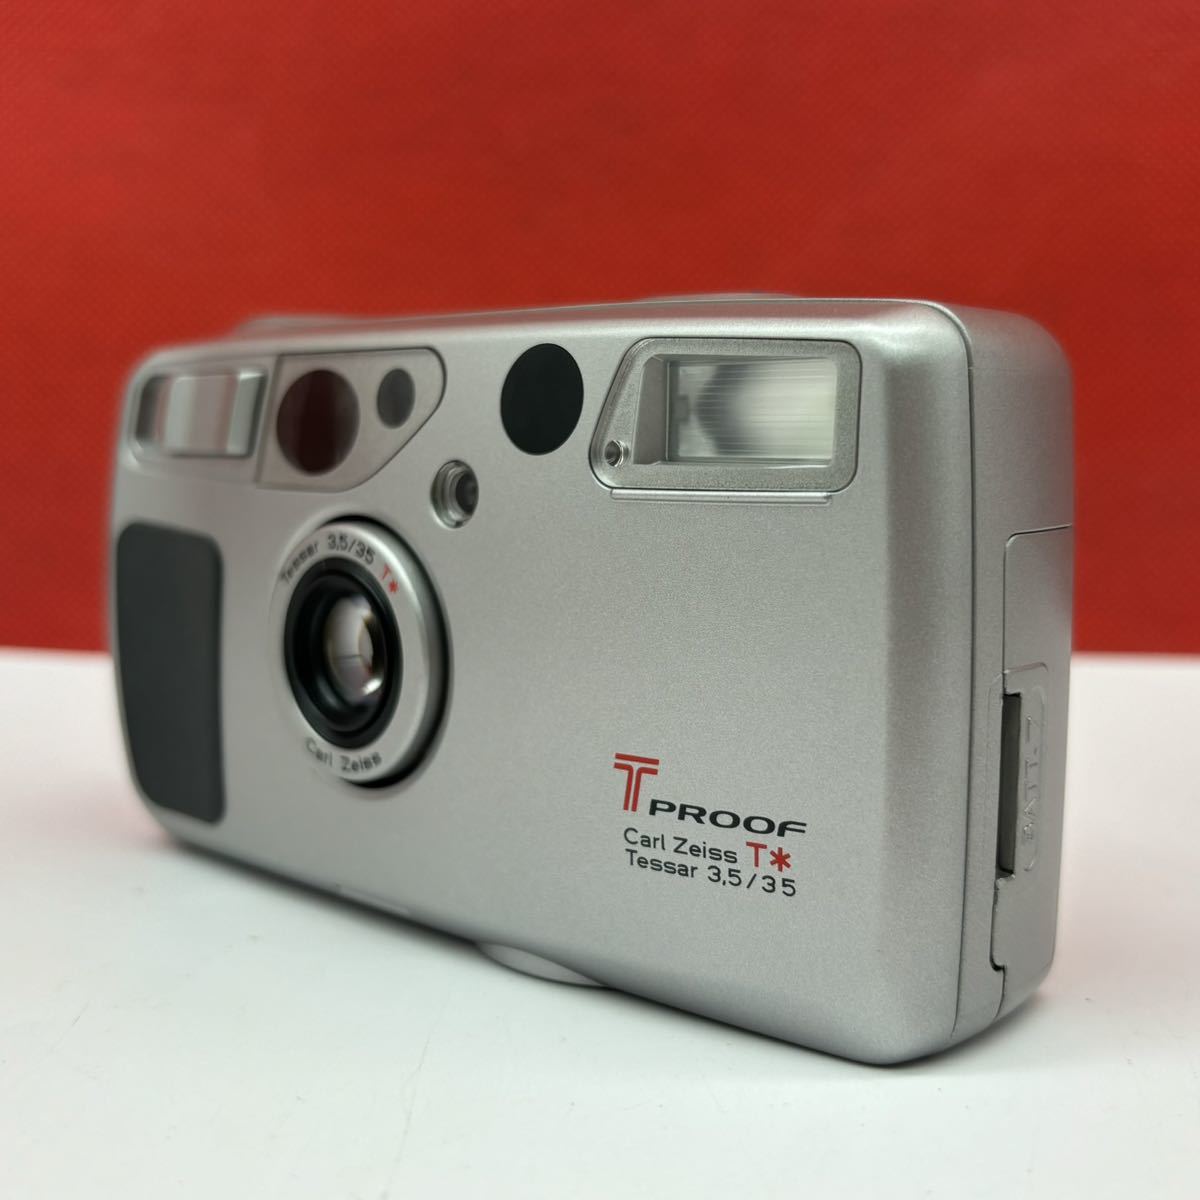 ◇ KYOCERA T PROOF コンパクトフィルムカメラ Carl Zeiss T* Tessar